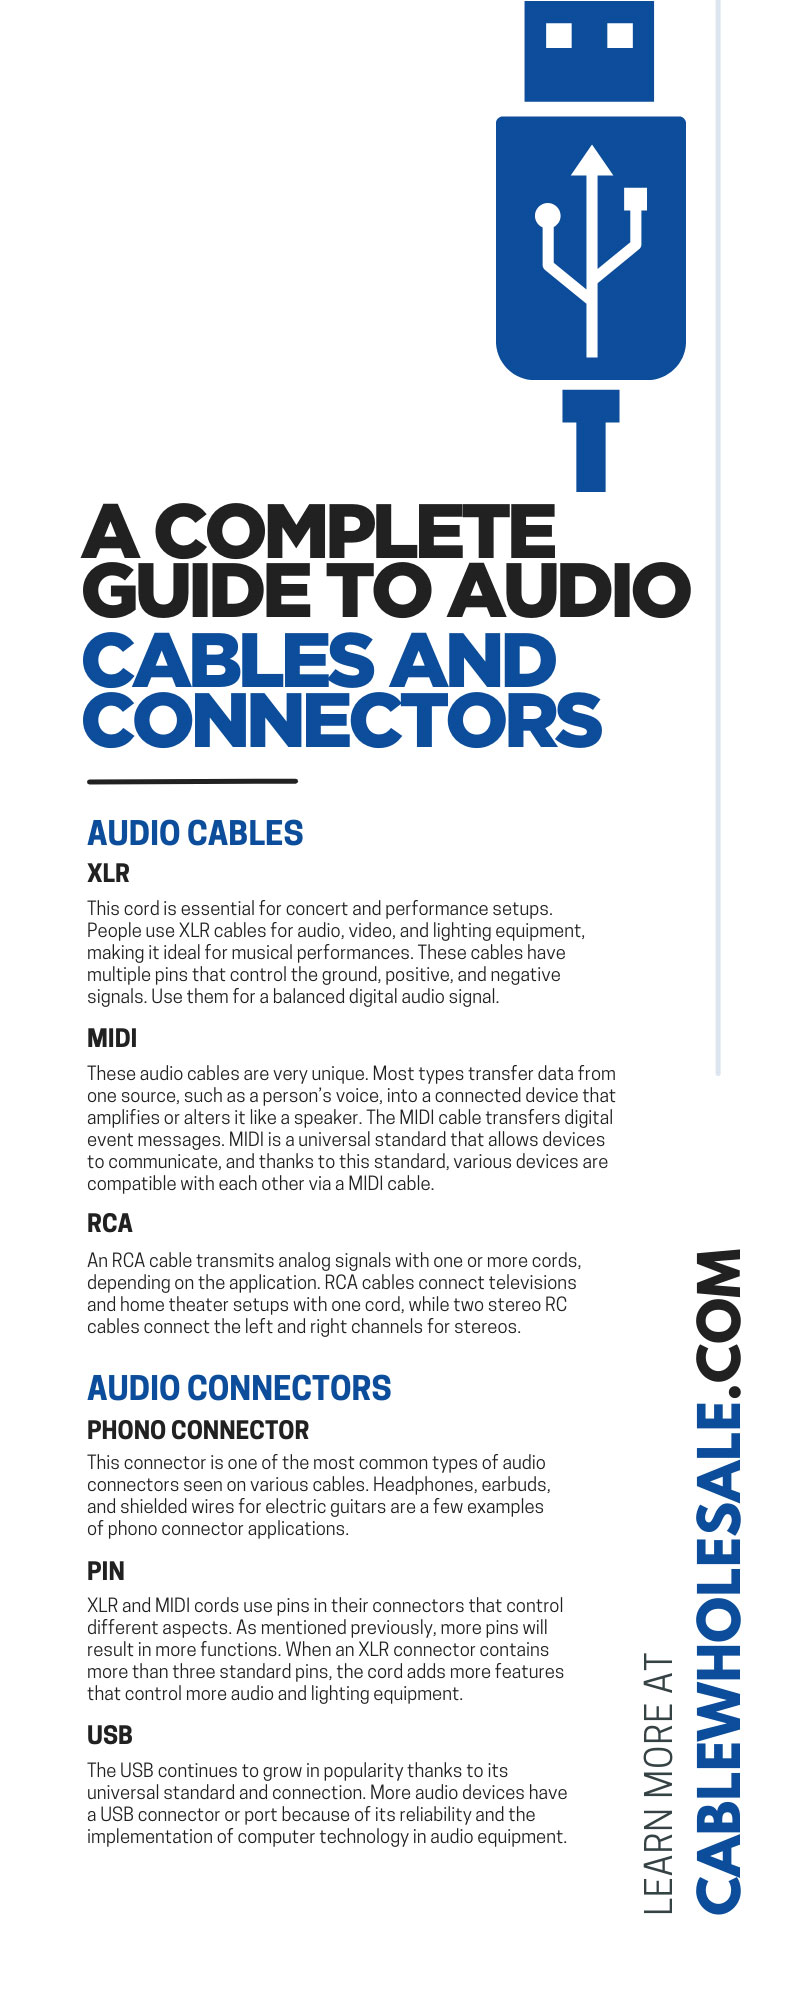 A Complete Guide to Audio Cables and Connectors